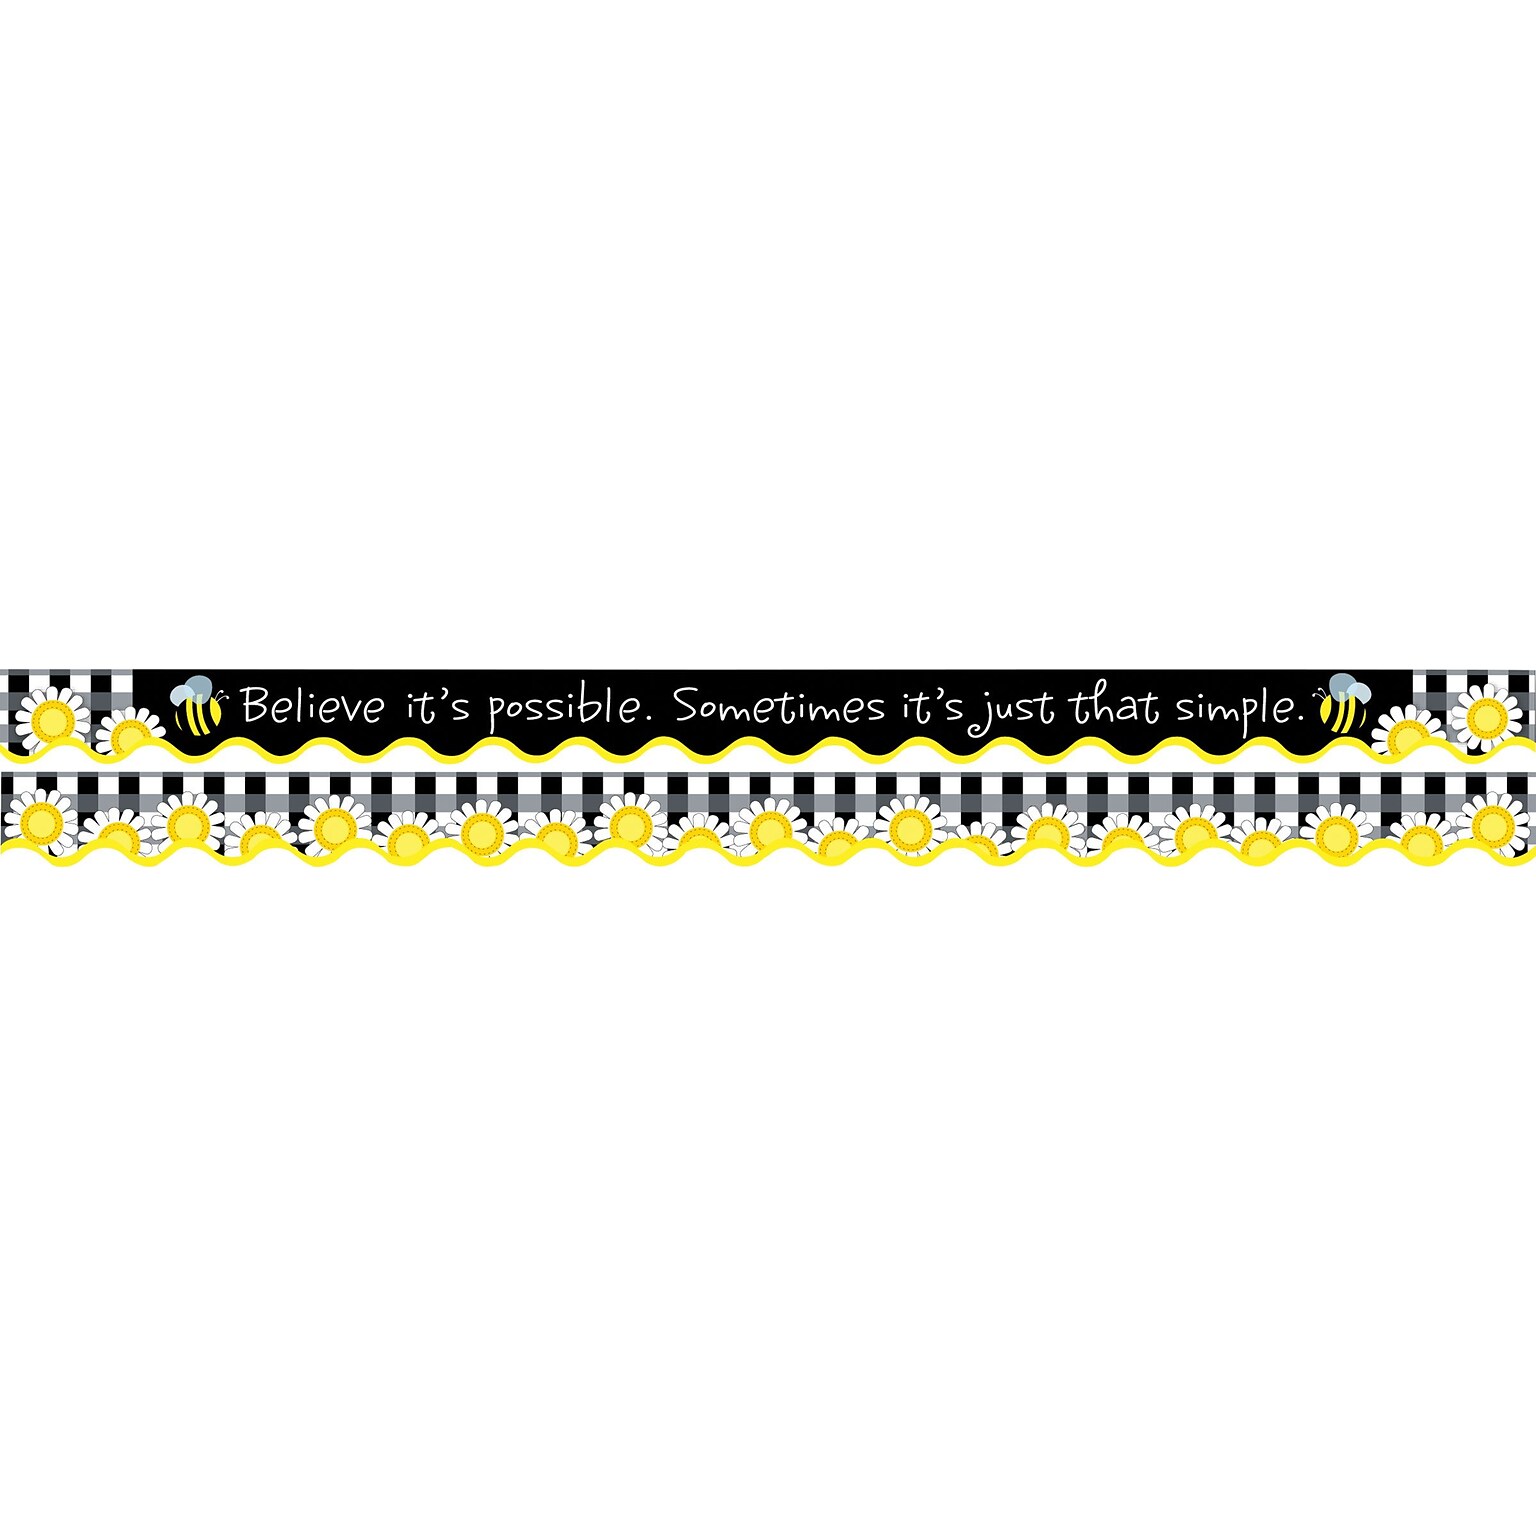 Barker Creek Believe Its Possible Double-sided Scalloped Trim, 39-ft of scalloped trim per package (BC936)